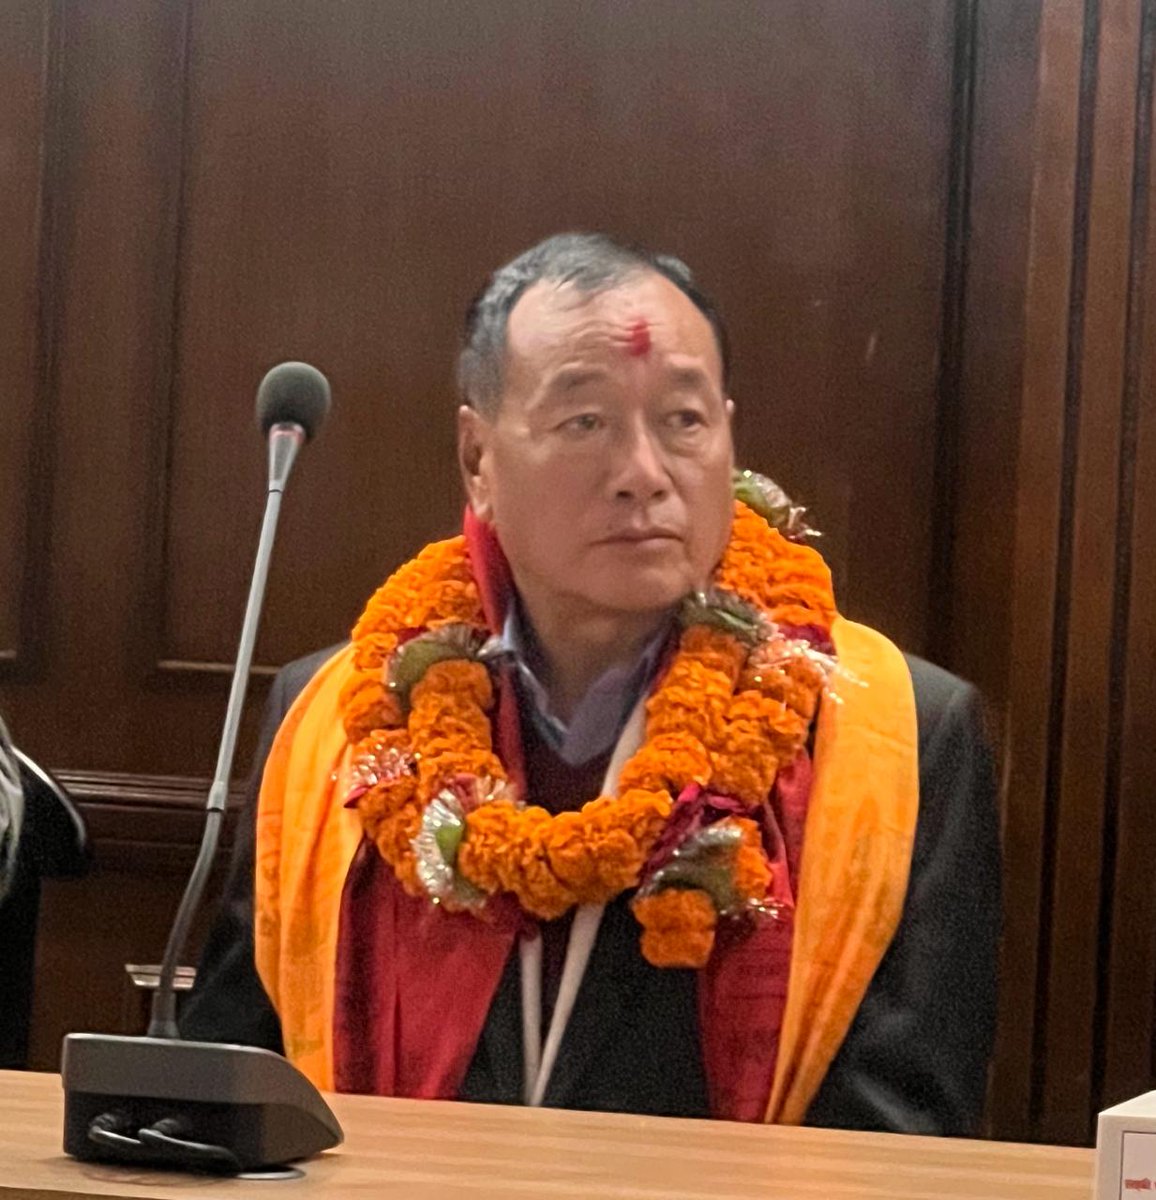 Huge congratulations and warm welcome to Honorable Hit Bahadur Tamang, the newly appointed Minister for Culture, Tourism, and Civil Aviation. Wishing you a prosperous and impactful tenure! ✈️🇳🇵 #CAAN #MOCTCA #NepalAviation